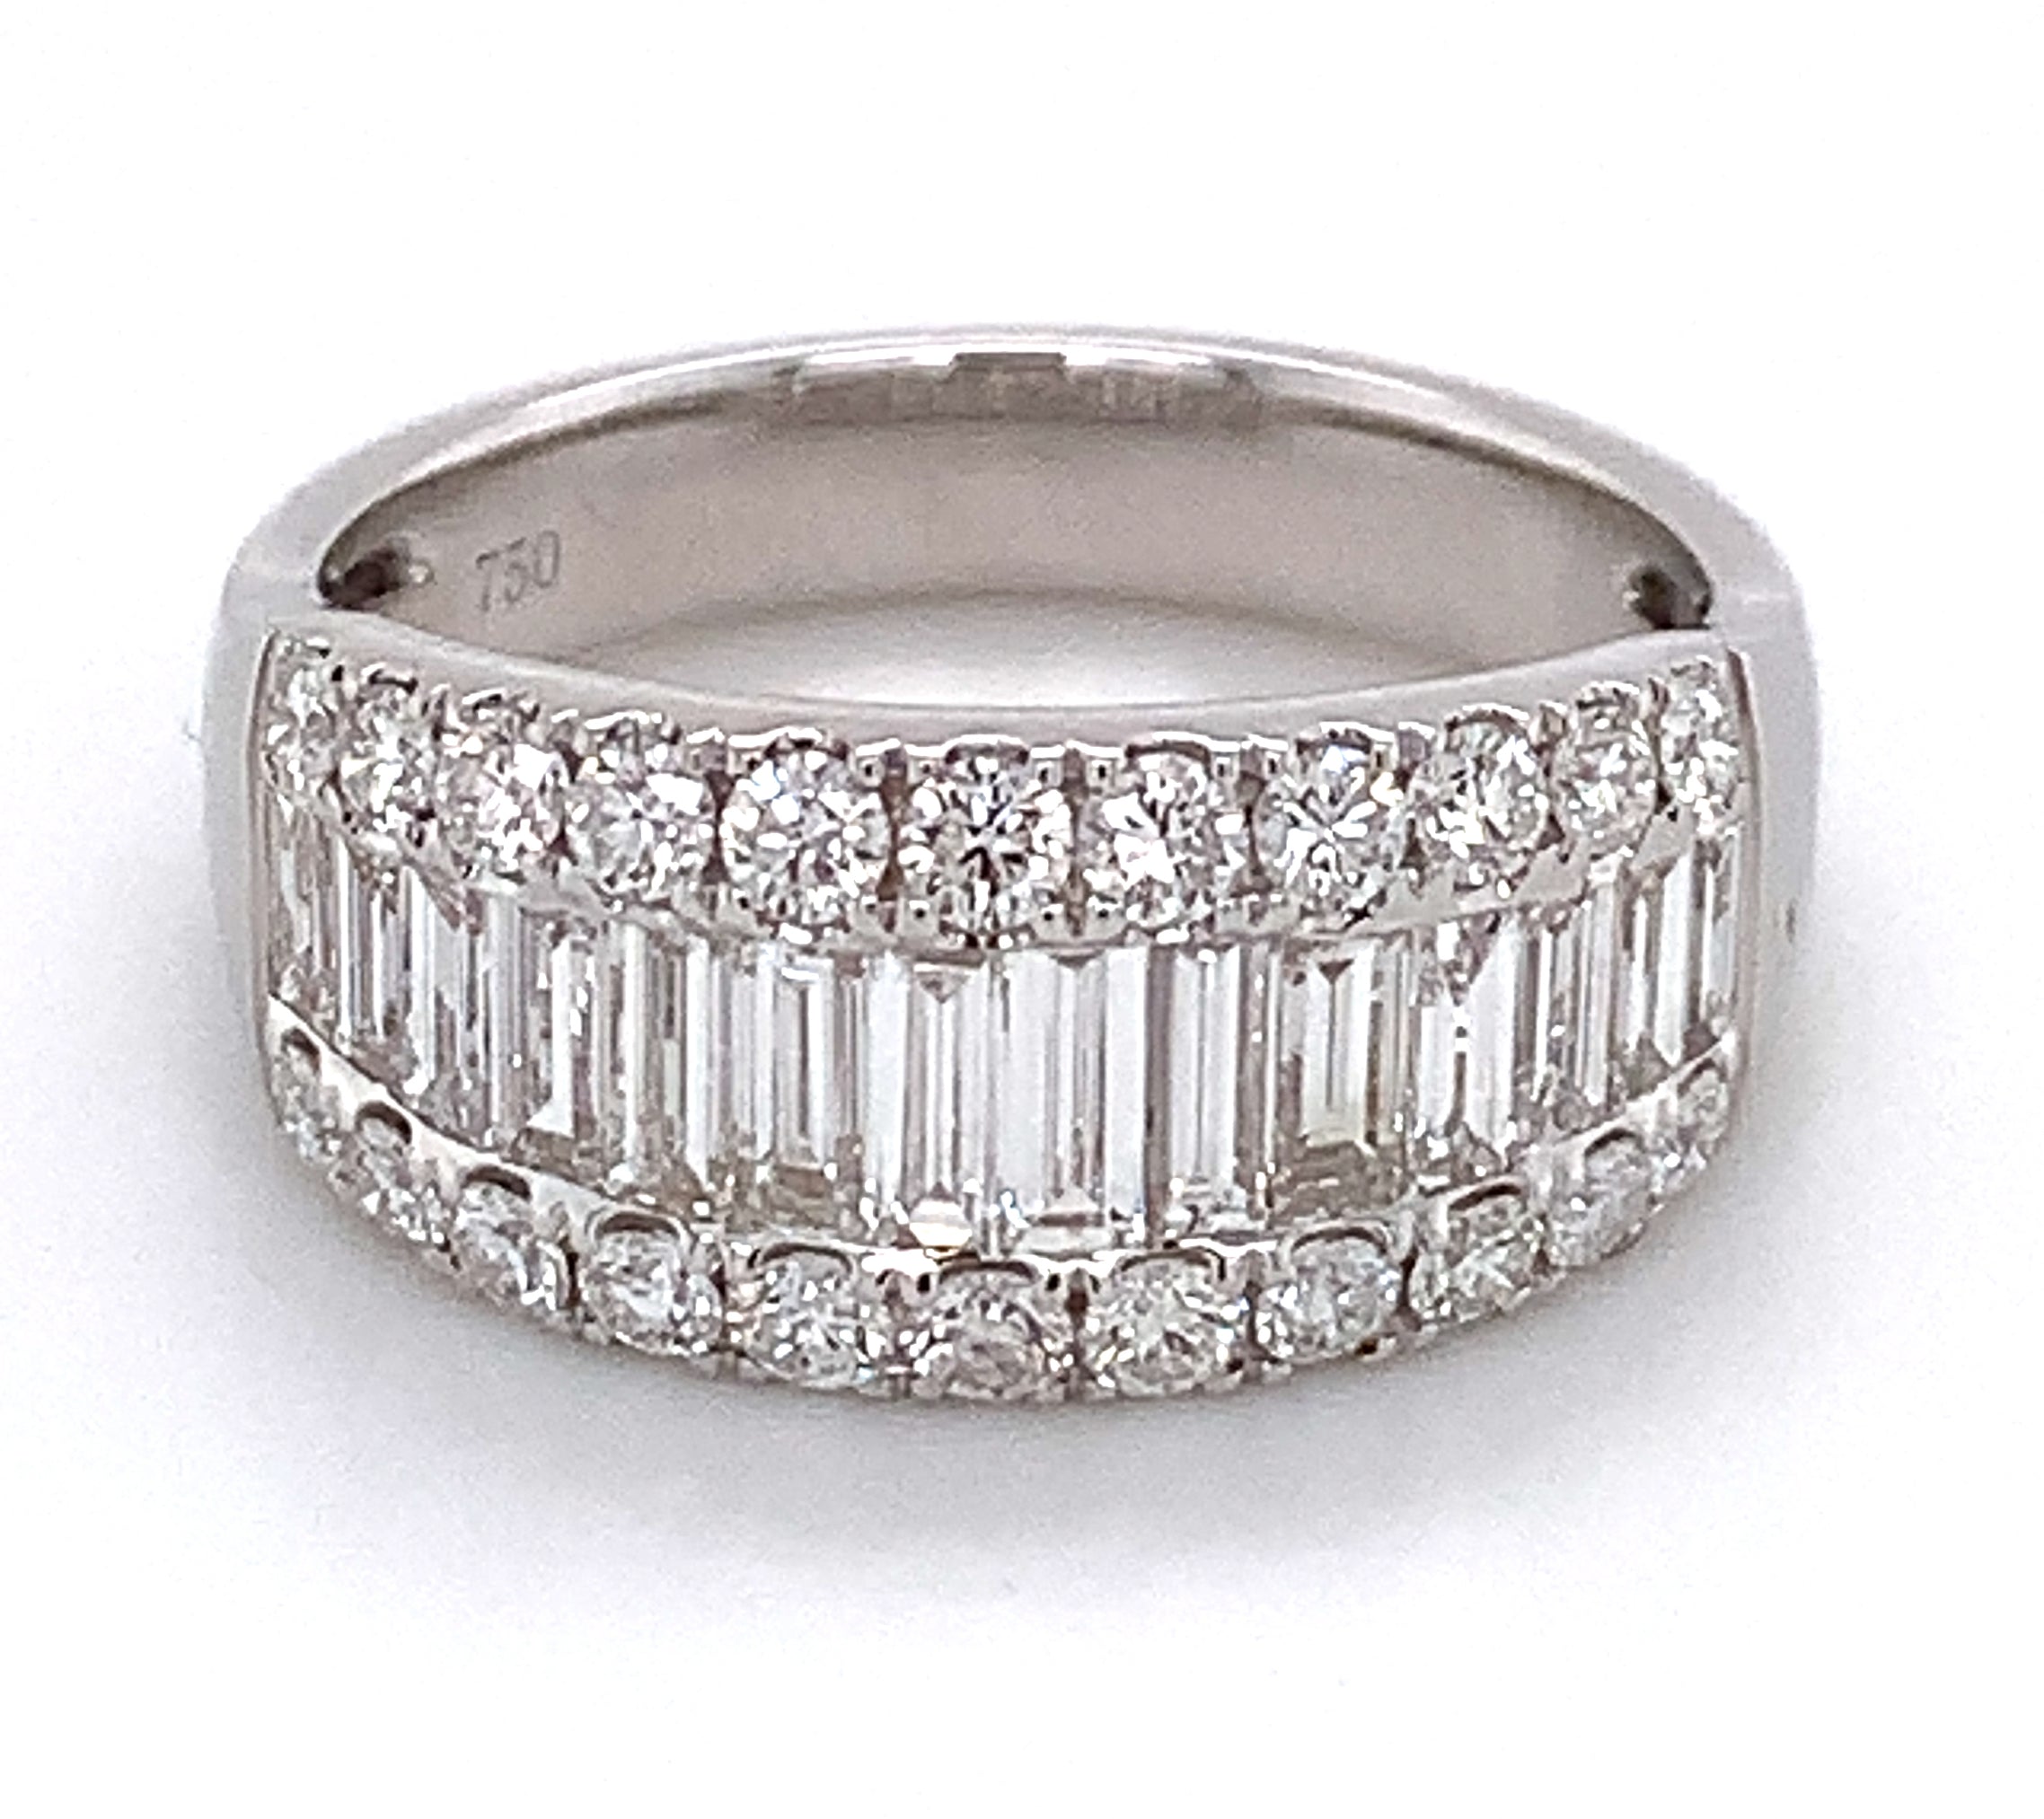 Baguette and Round Cut Diamond Ring 1.58ct t.w.